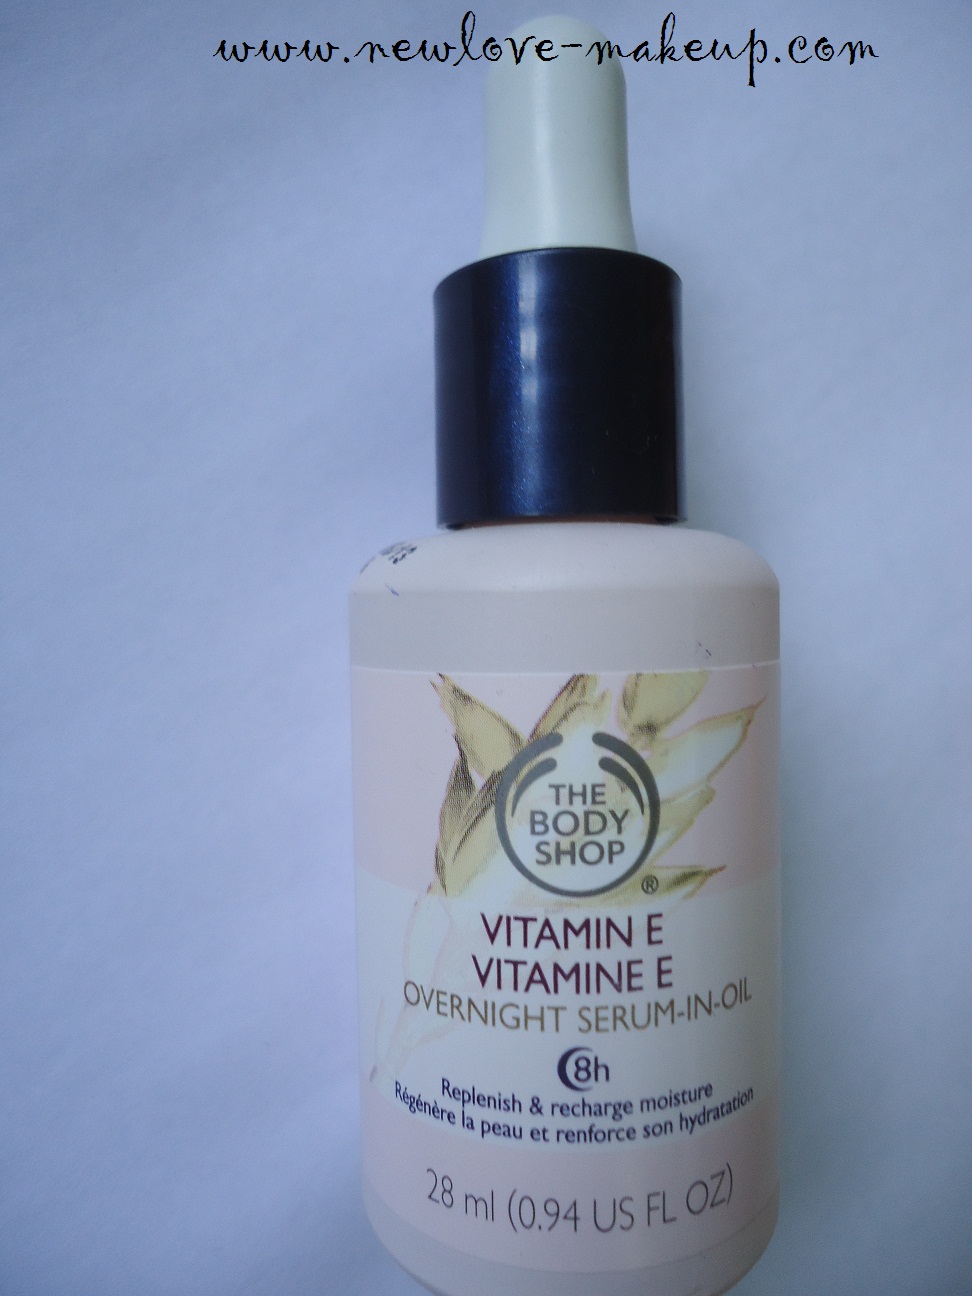 Zonnig wees gegroet Maak plaats The Body Shop Vitamin E Overnight Serum-In-Oil Review - New Love - Makeup